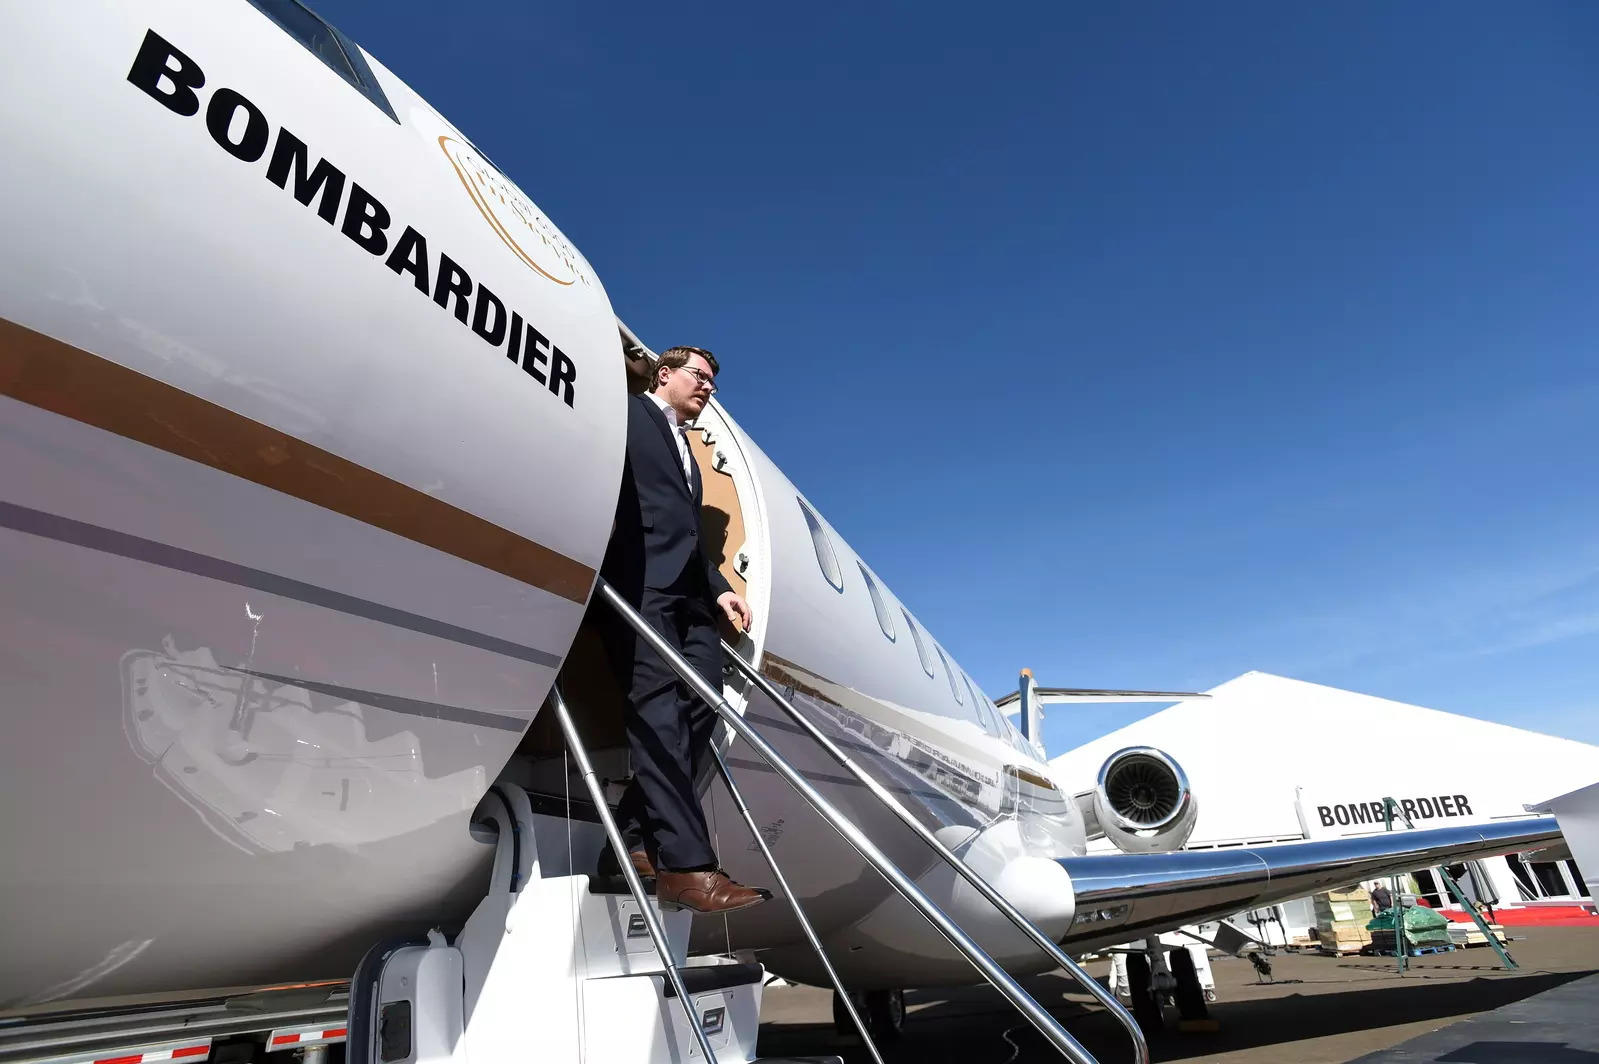 Climate change: What should we do about private jets?